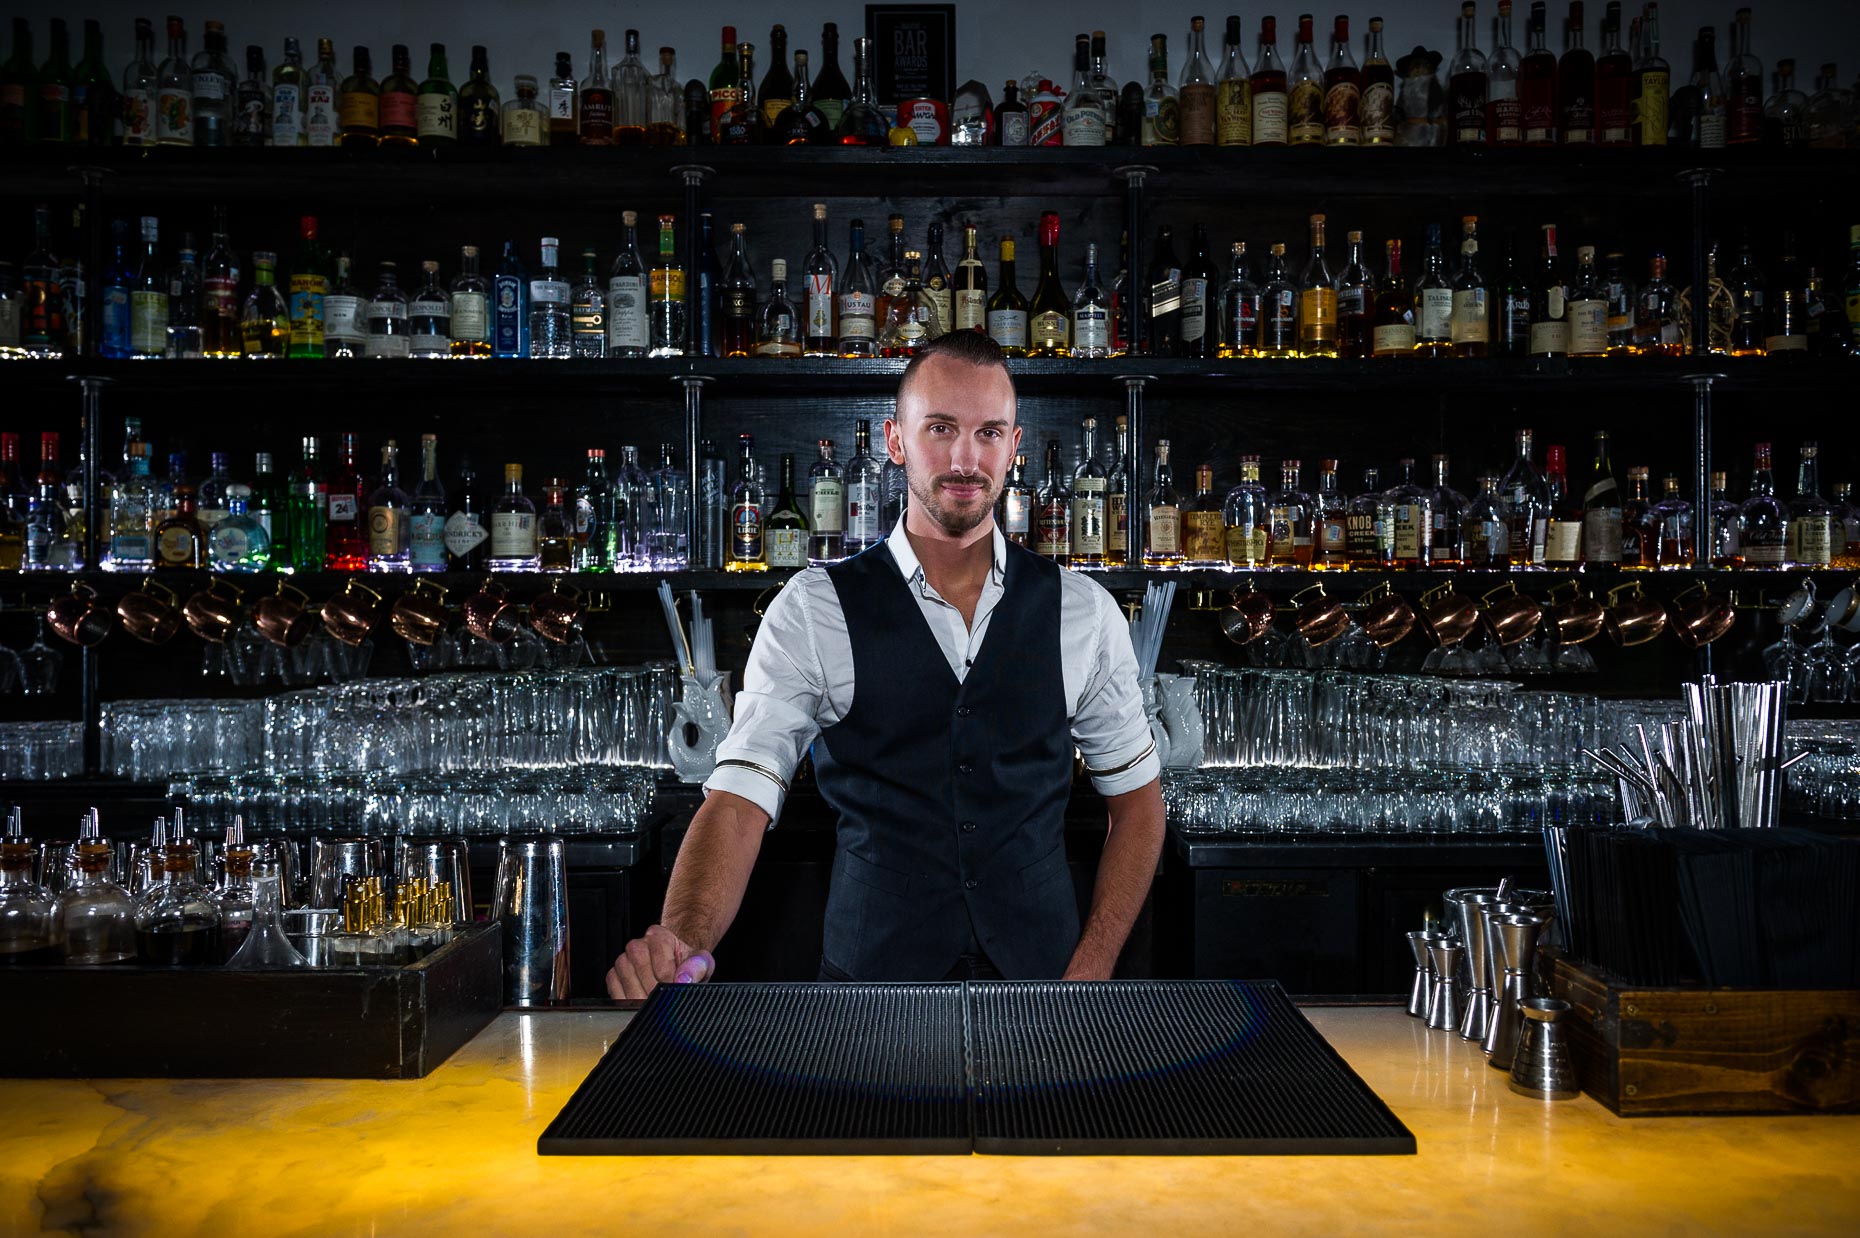 aaron-ingrao-keepers-of-the-craft-cocktails-across-america-roosevelt-room-austin-47-Edit